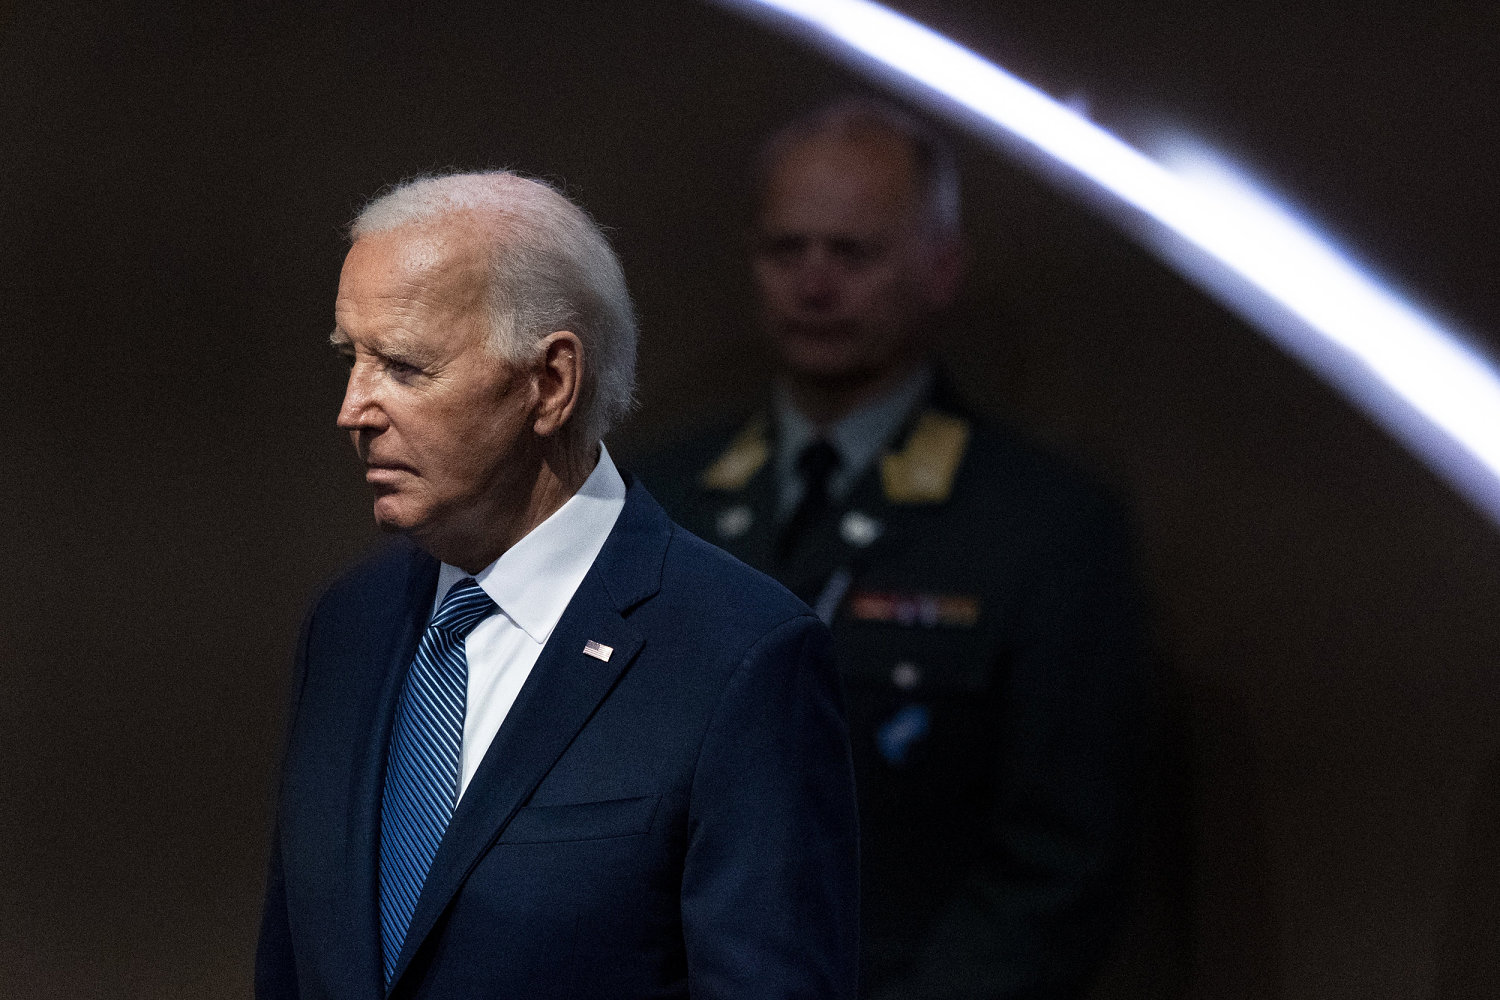 Biden faces pressure from growing list of donors and House Democrats calling on him to step aside